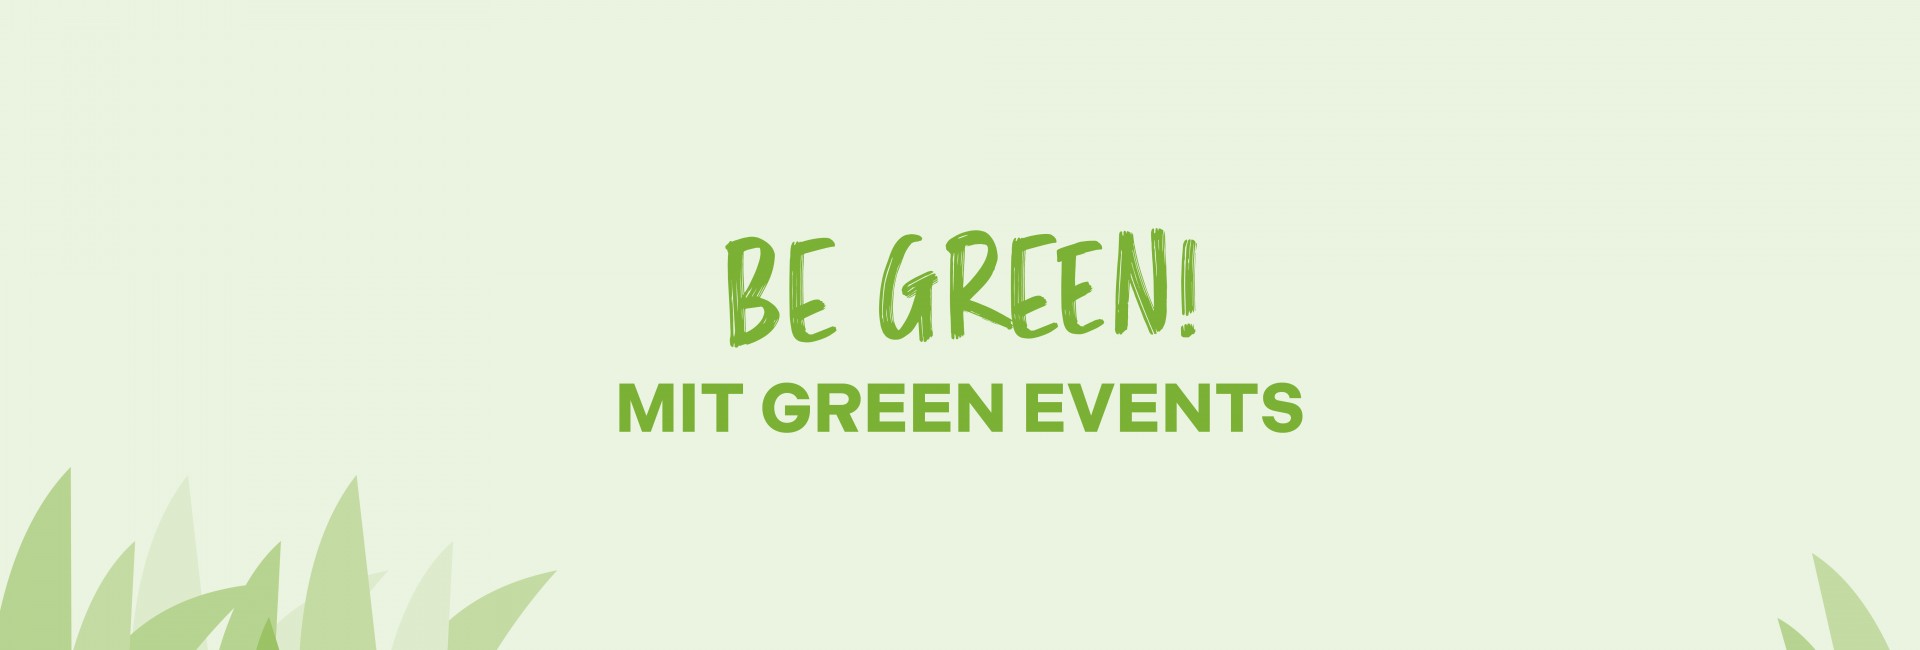 Green Events und Meetings